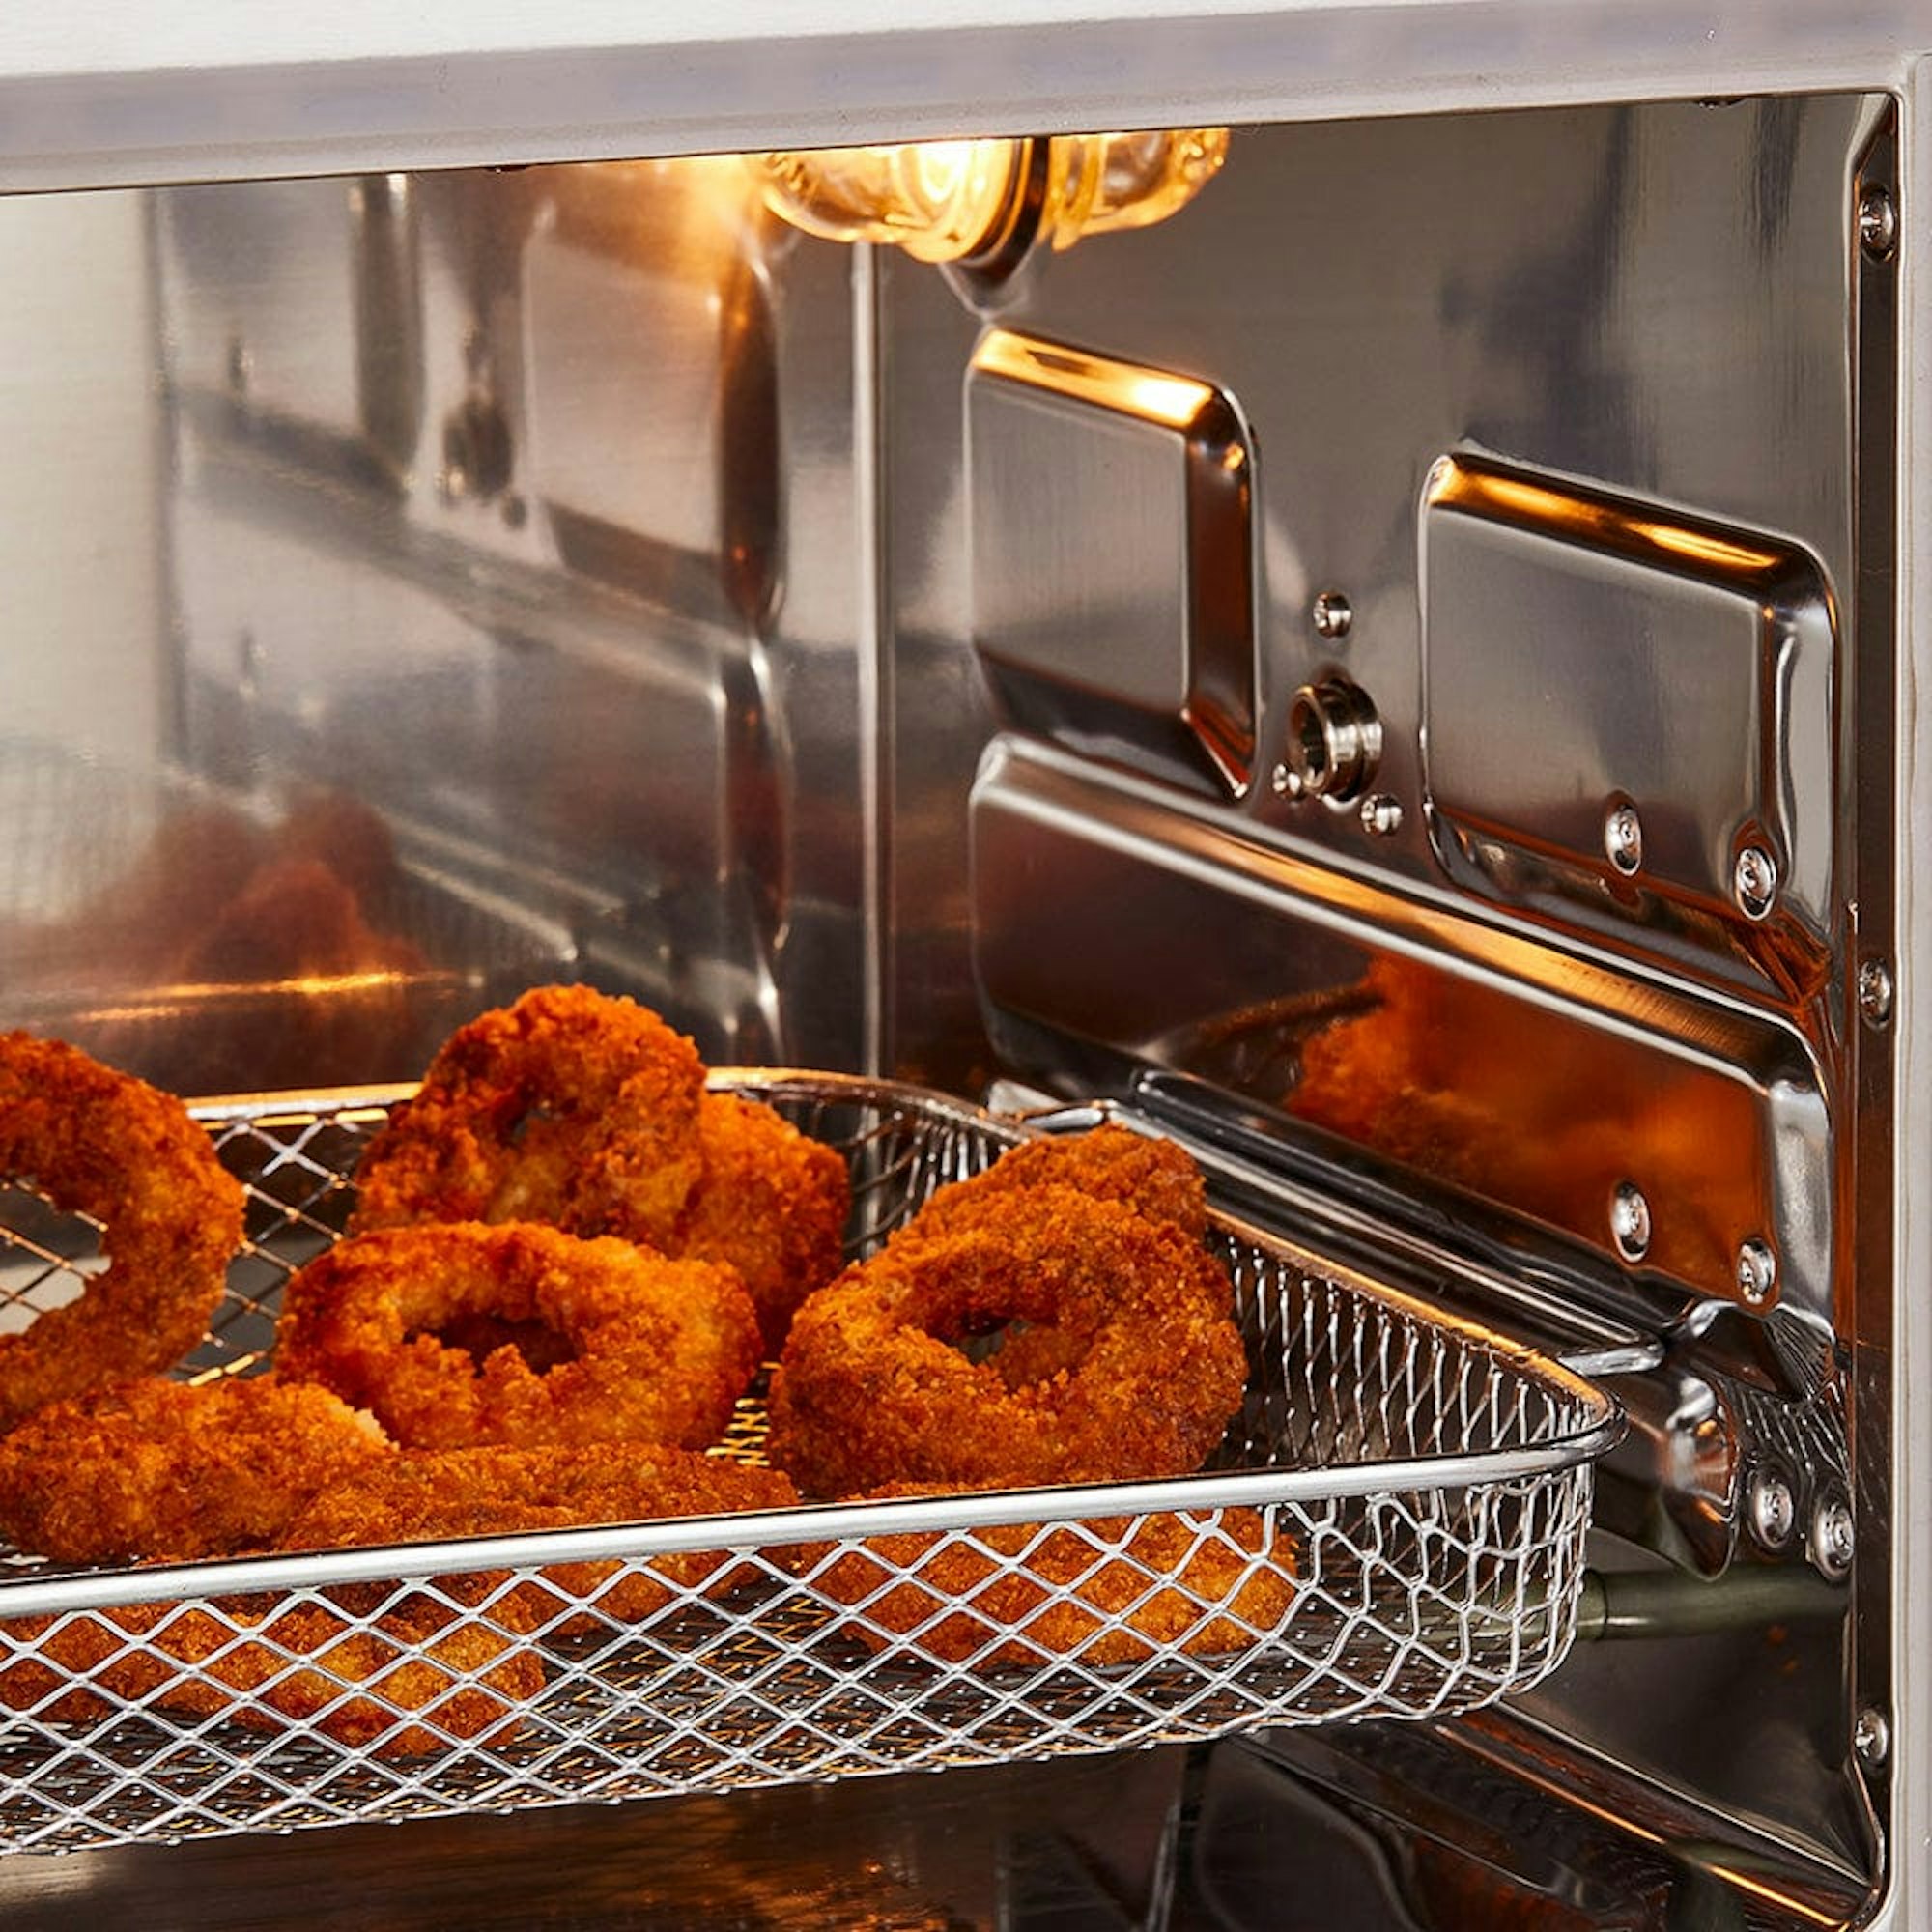 Baccarat The Ultimate Fry XL Air fryer Oven with onion rings